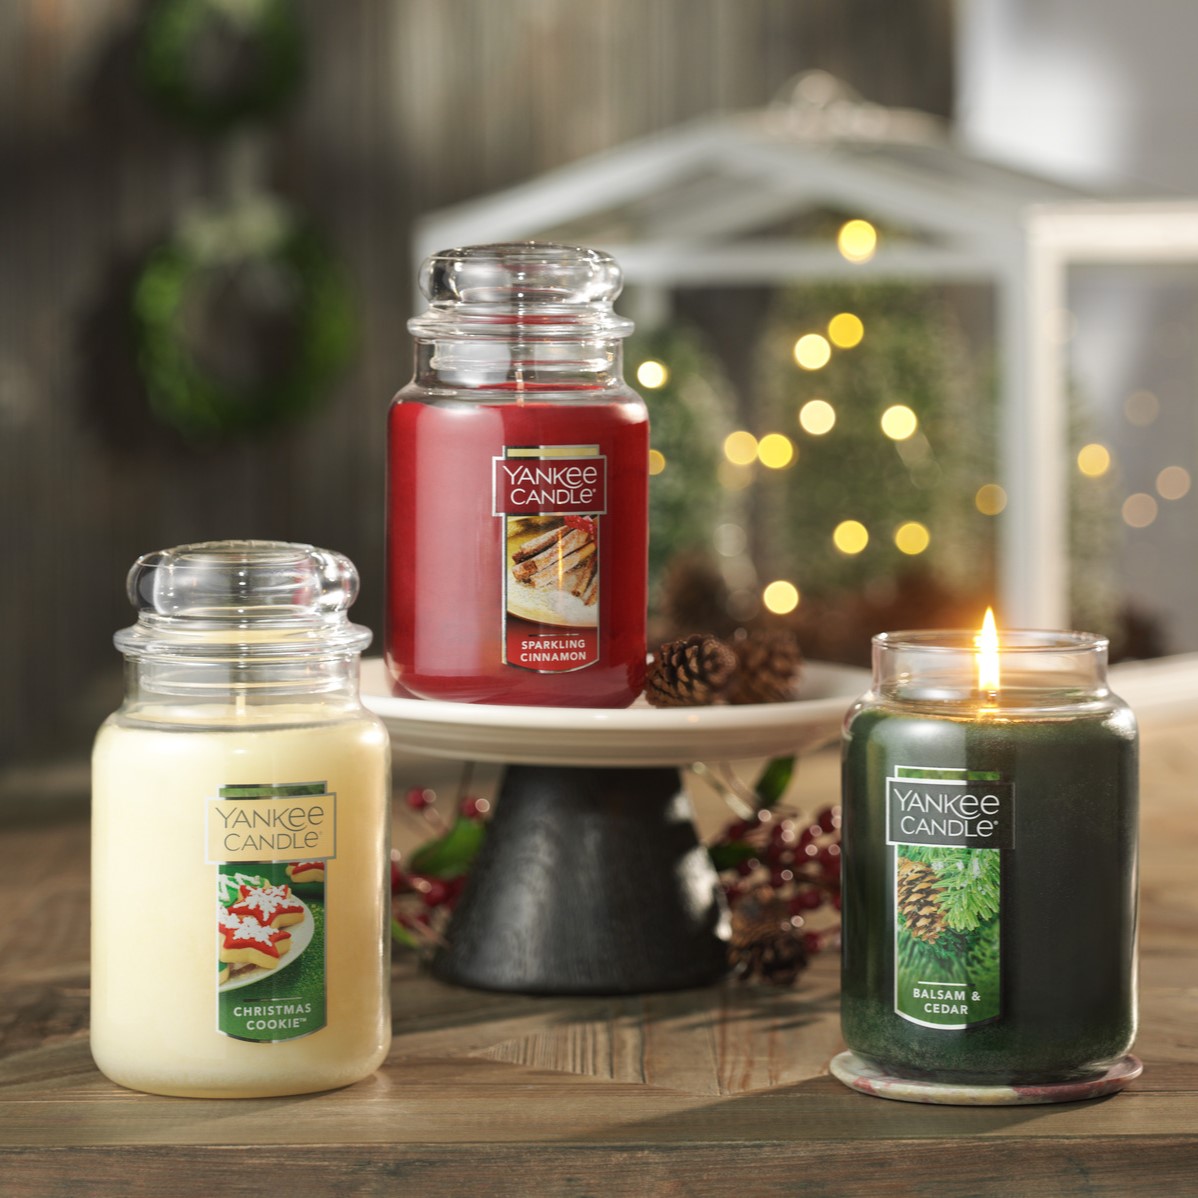 Candle Days at Yankee Candle from Yankee Candle